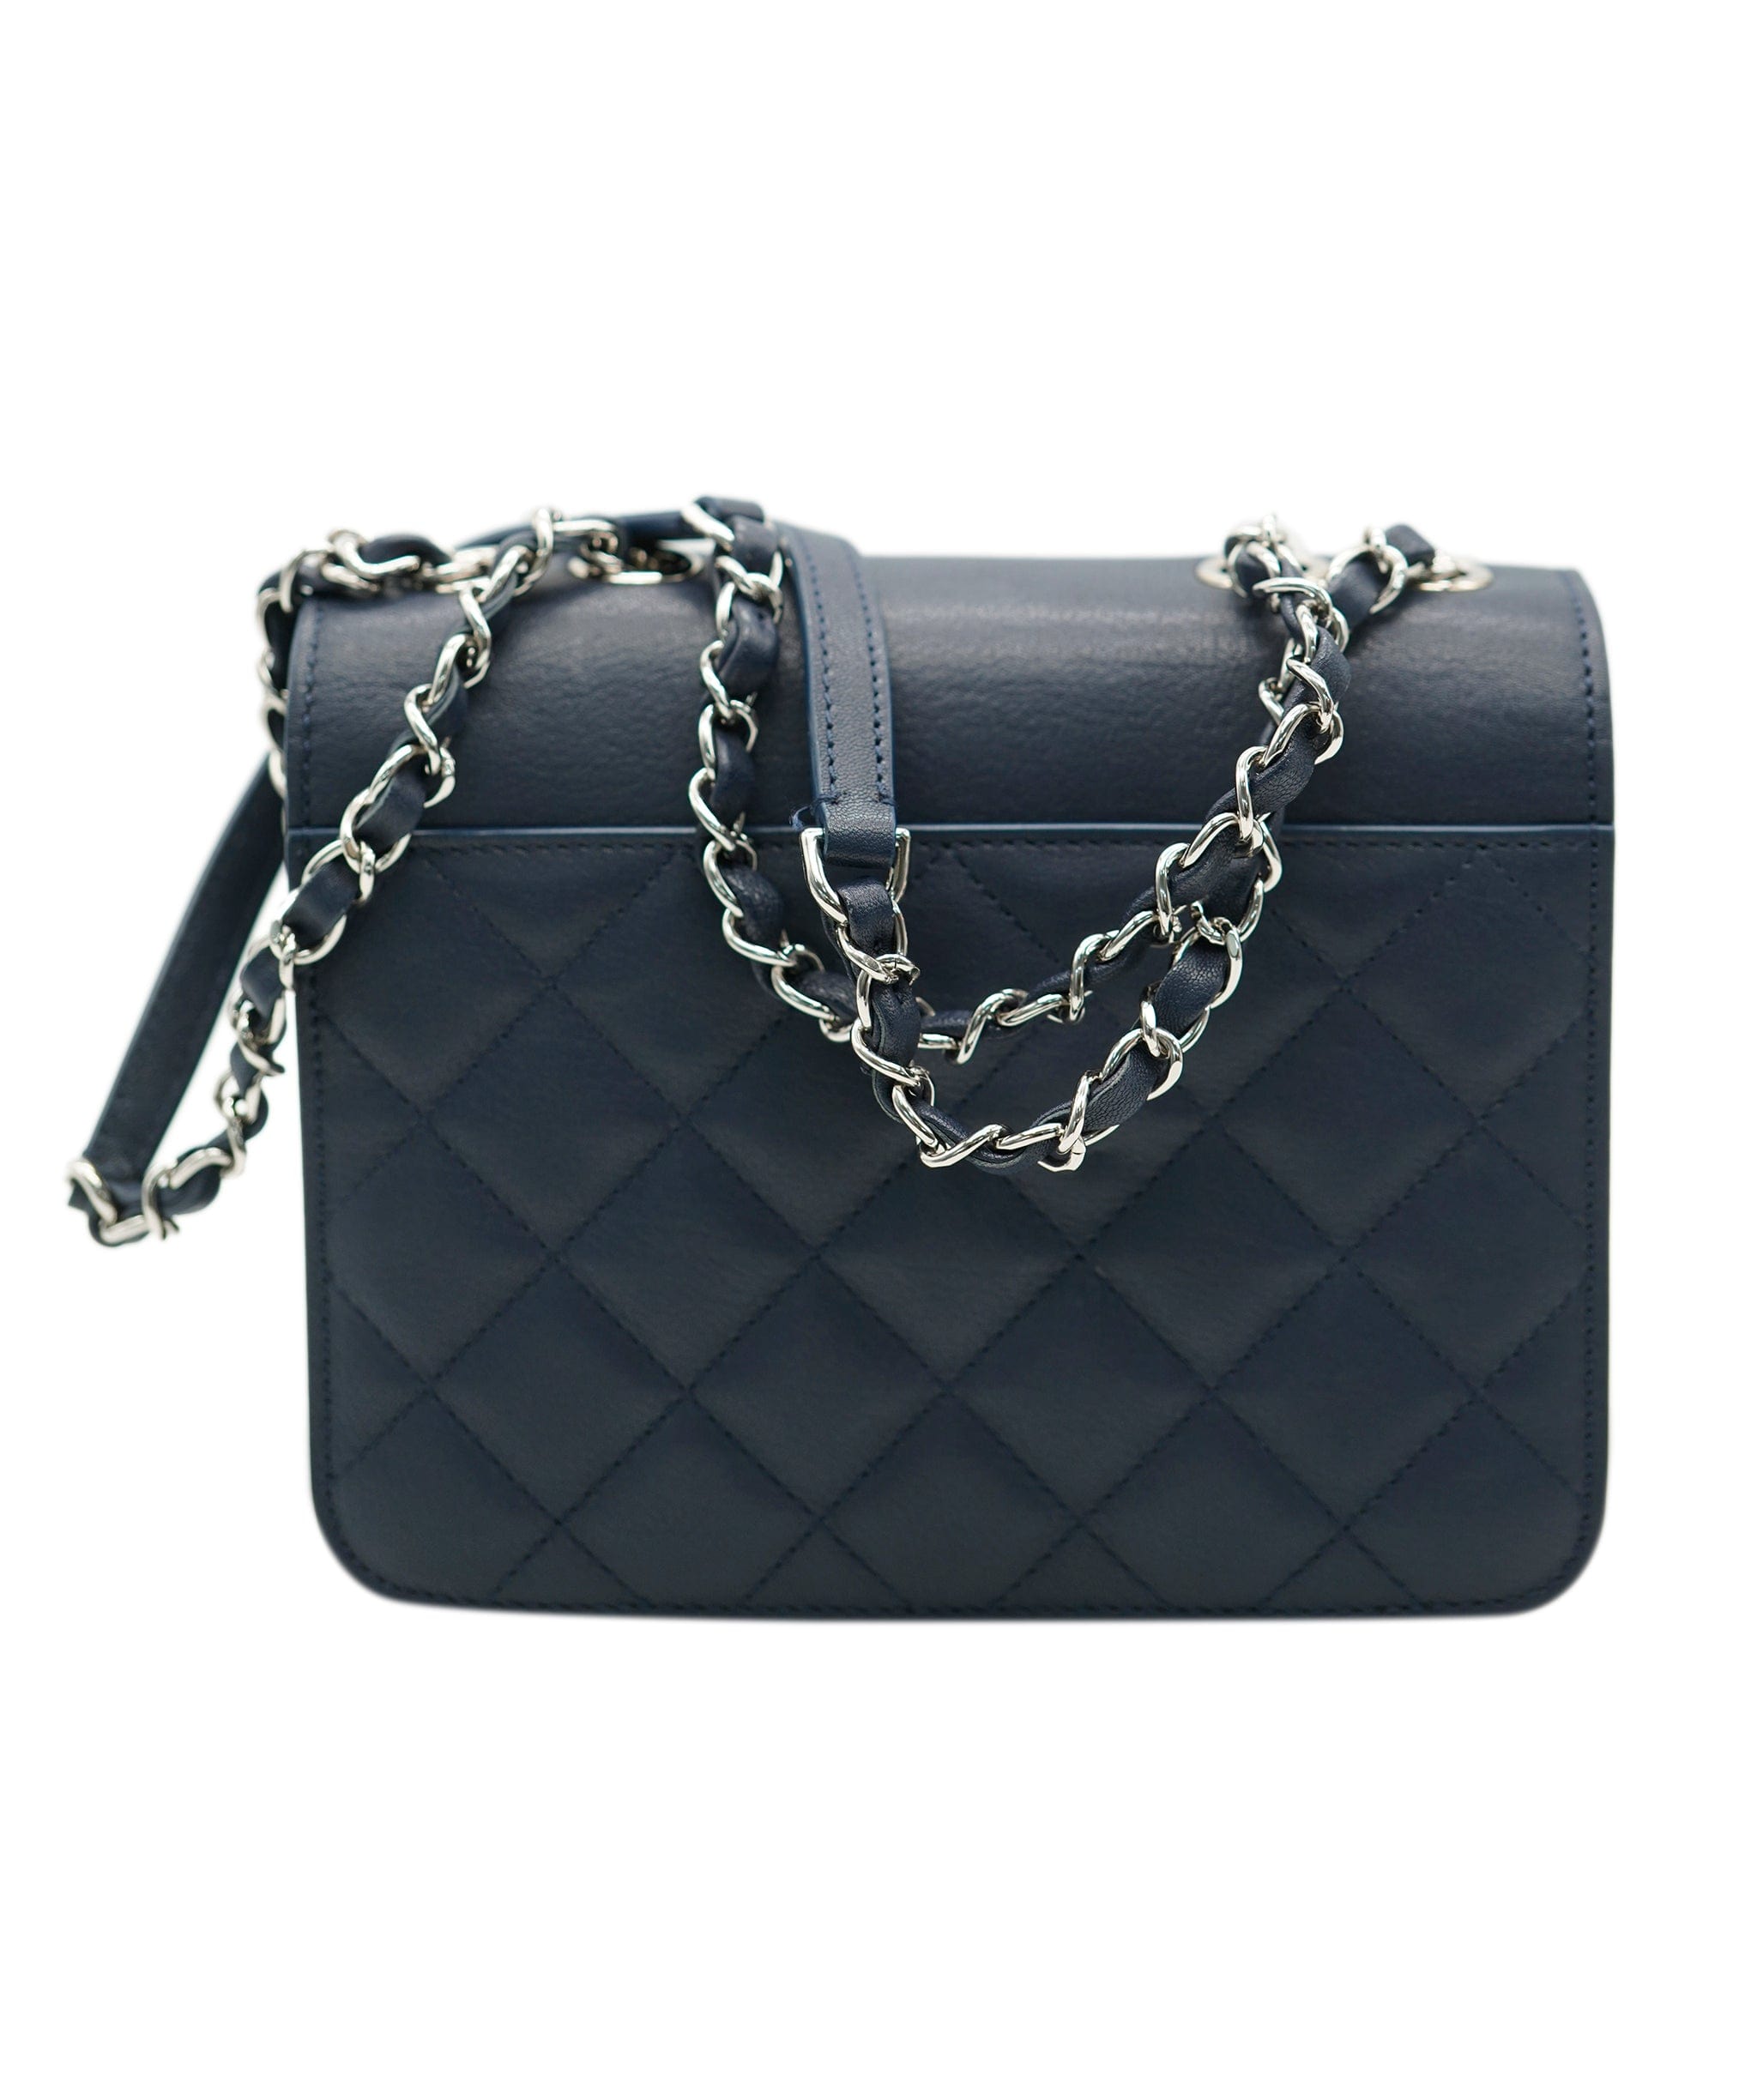 Chanel Chanel Navy Calf Skin CC Quilted Crossbody Bag  AGC1661